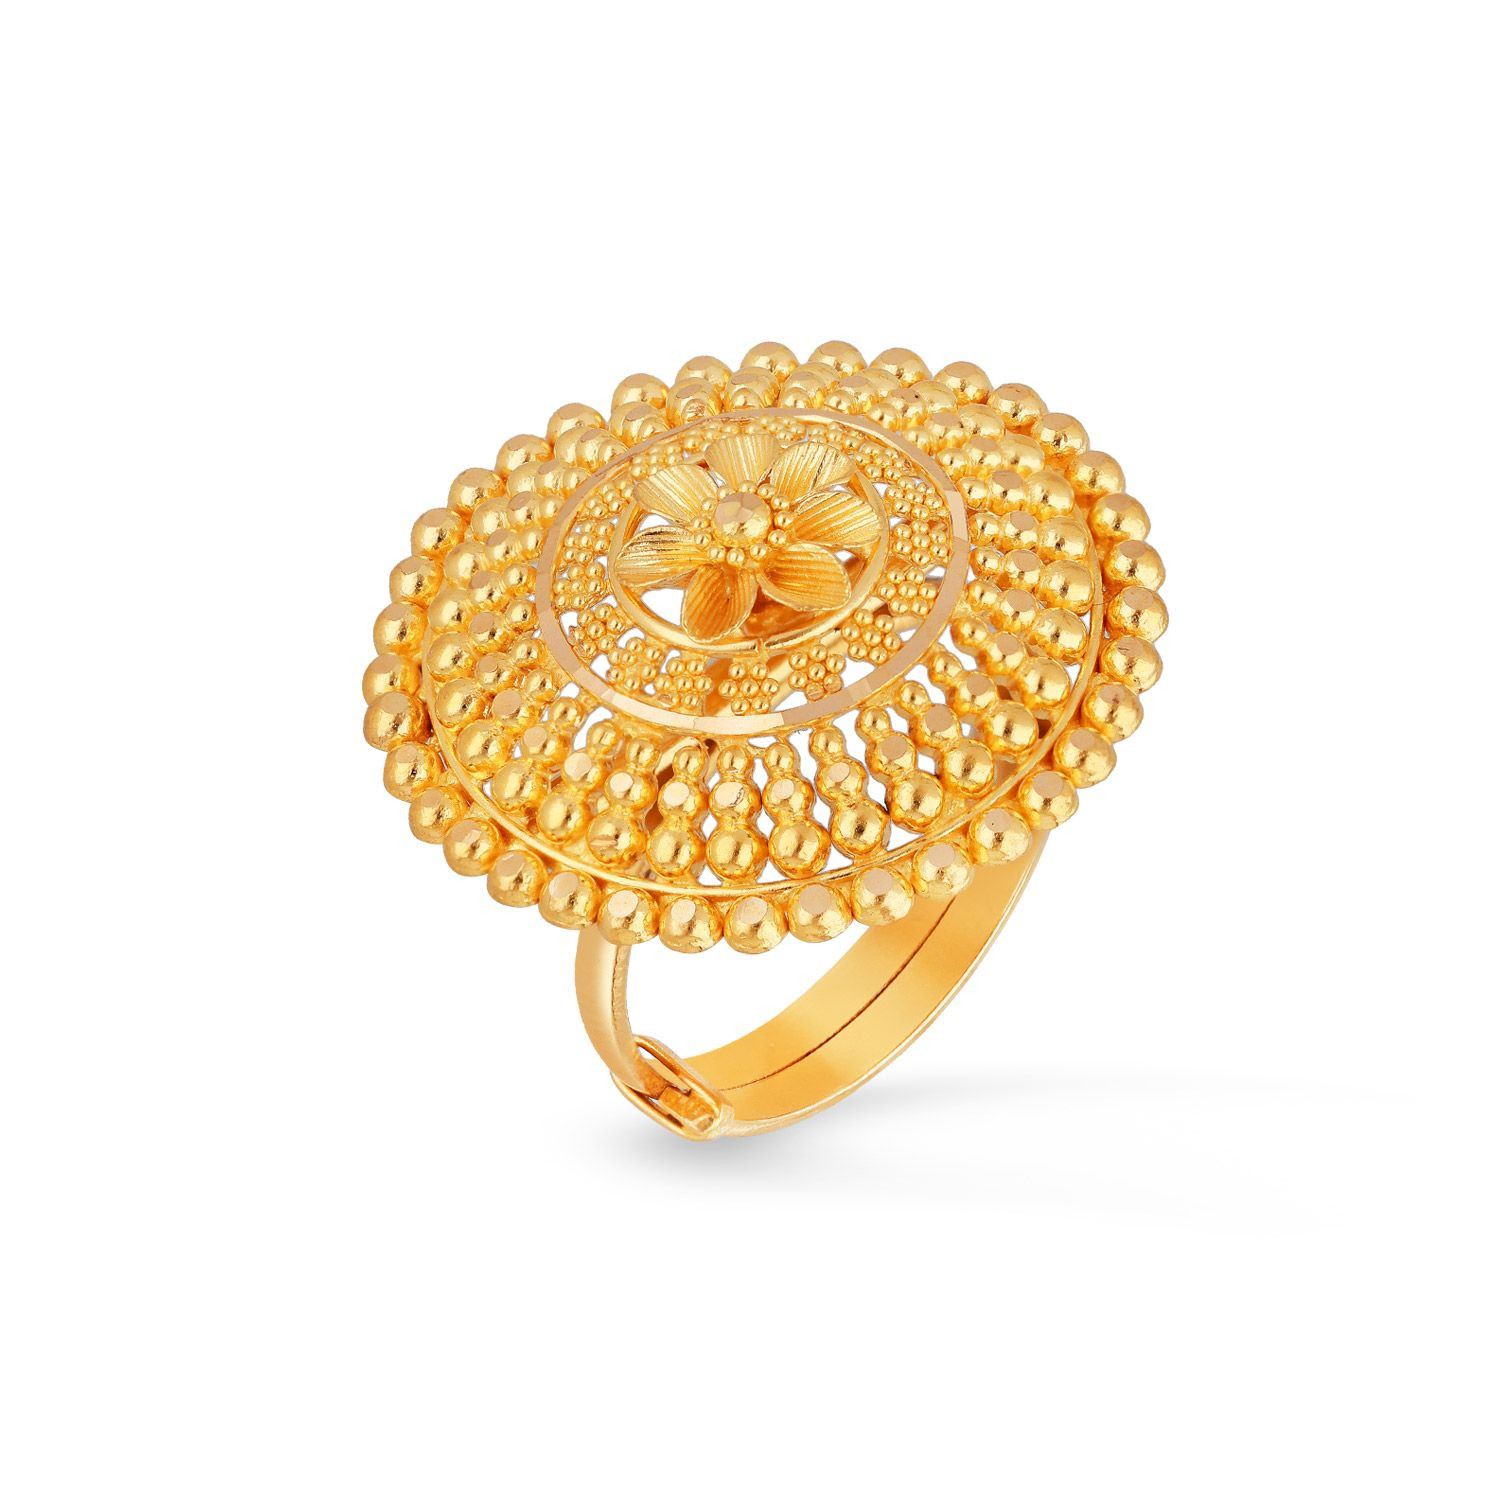 ZR2396 Right Hand Ring in 14k Gold with Diamonds – Zeghani Jewelry